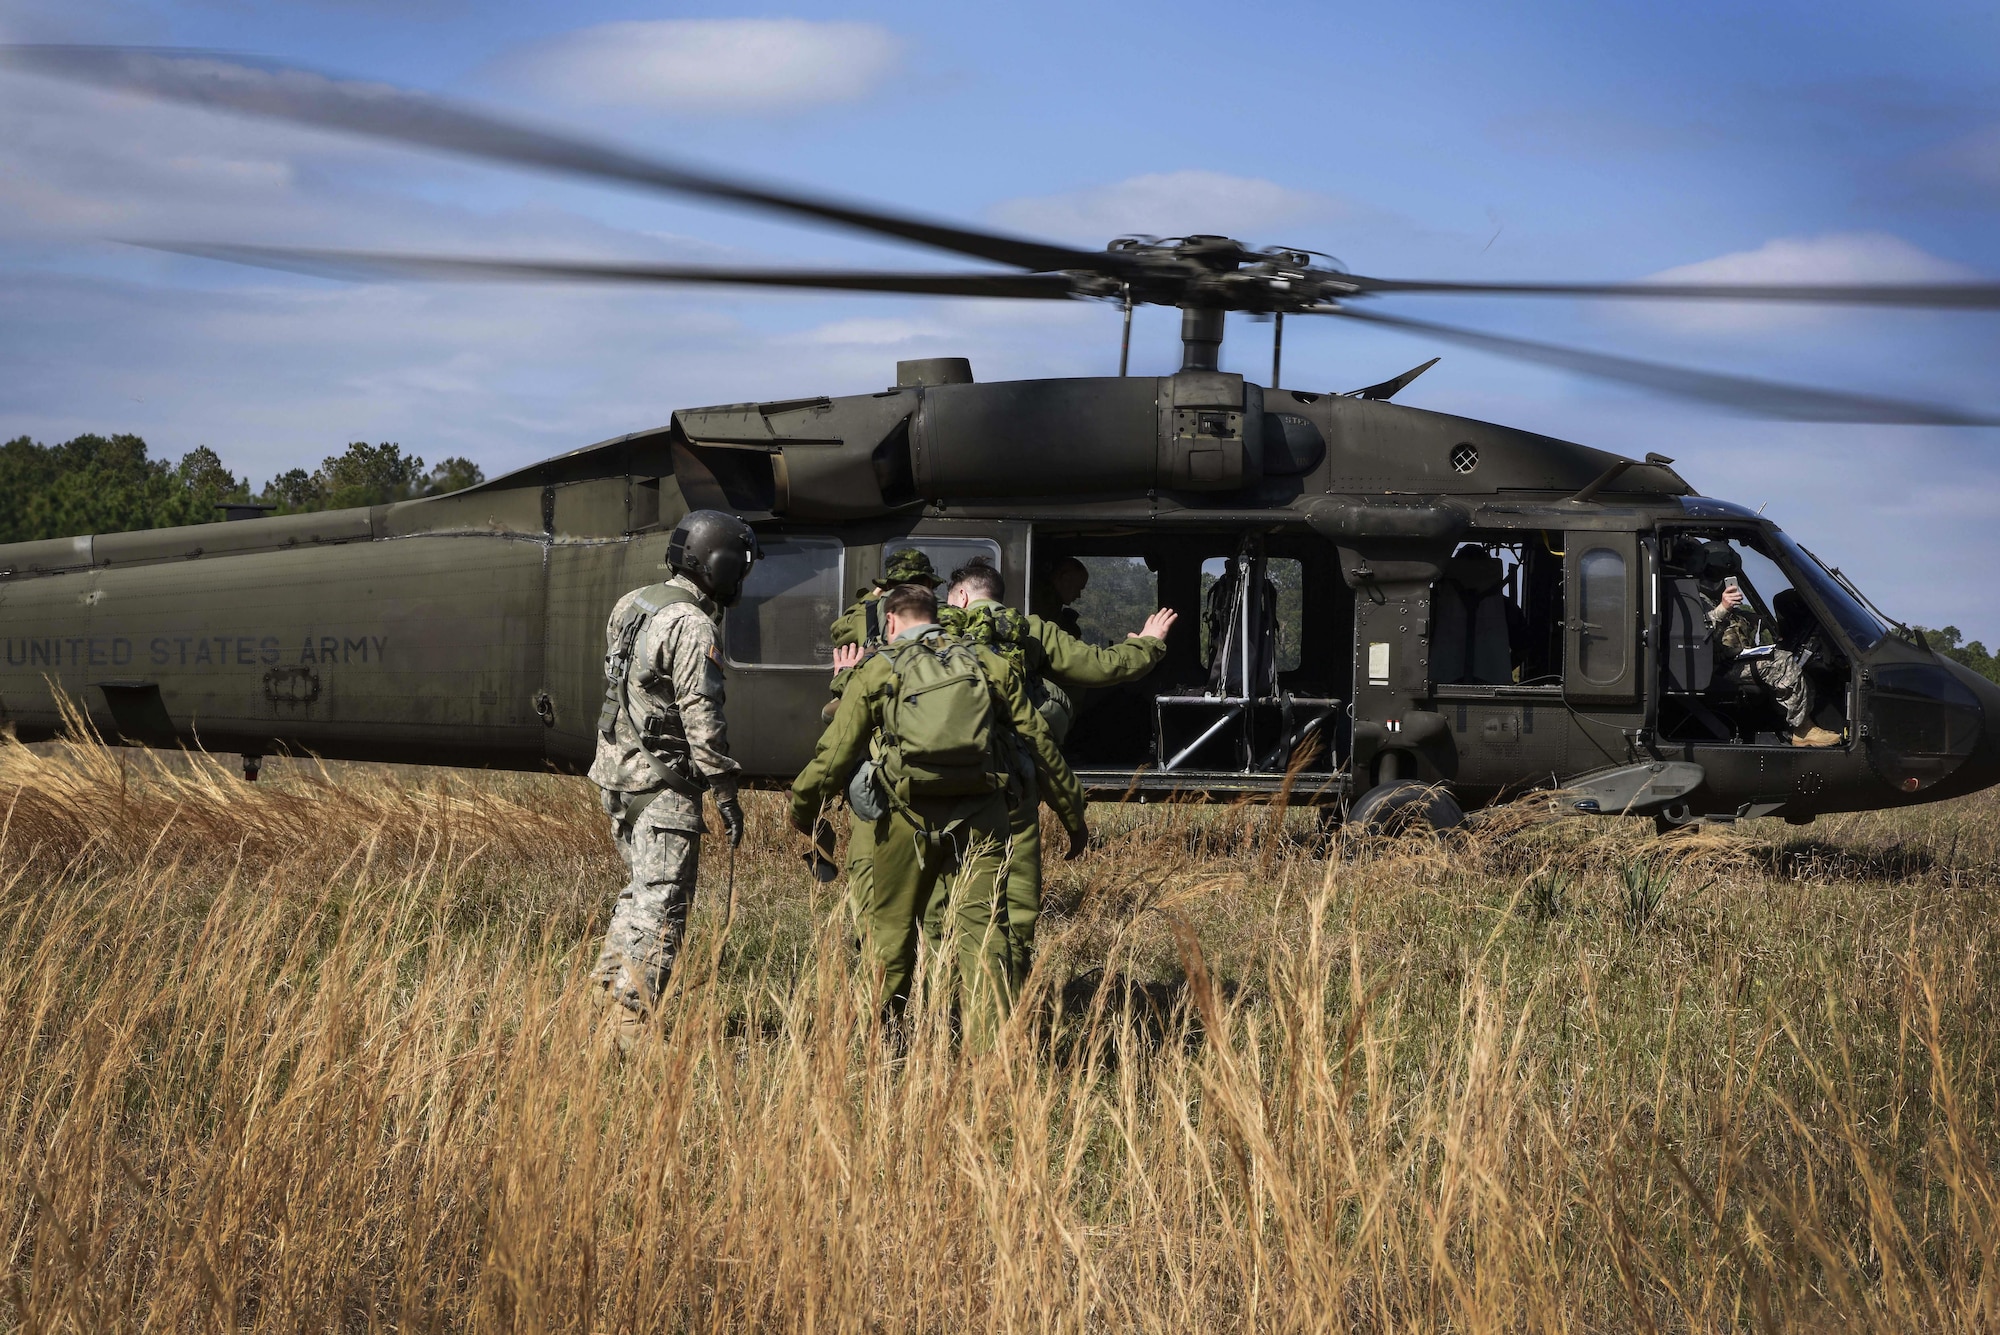 U.S. Army personnel rescue Royal Canadian Air Force crew members from the 436 Transport Squadron as part of survival, evasion, resistance and escape training conducted during Green Flag Little Rock 17-04 Feb. 10, 2017, near Alexandria, La. During the exercise, aircrew members were selected randomly to participate in SERE training. (U.S. Air Force photo by Senior Airman Stephanie Serrano)